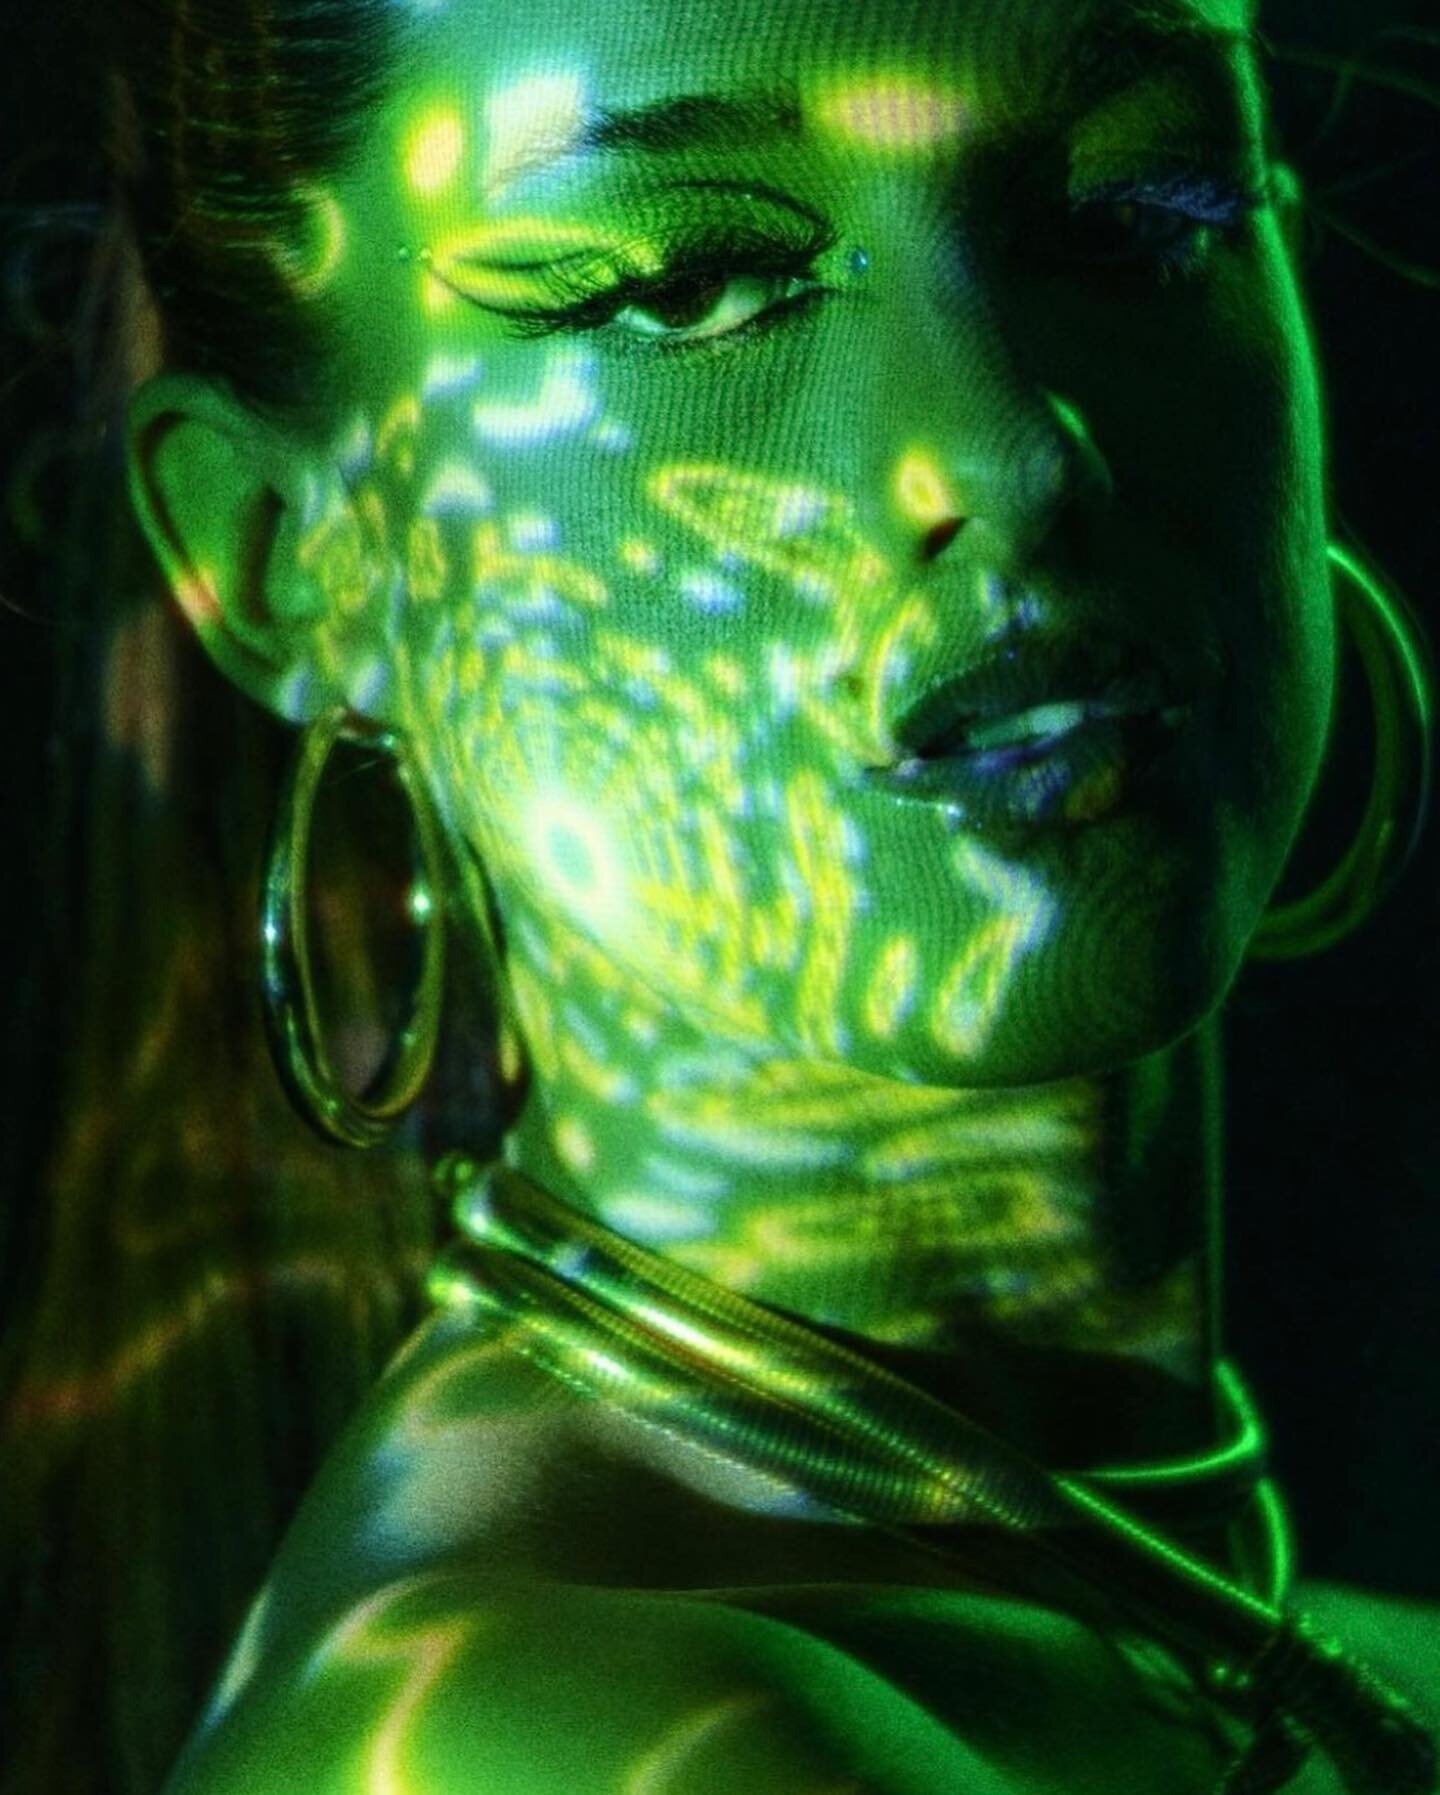 new new new w my fave @ellacollier for her single &lsquo; Upgrade &lsquo; out now 💚
Creative direction @cassieclairehowell 
Photographer @isaak_kimmel 
Makeup &amp; hair @christinaspinamua 
💚🪩💚🪩💚